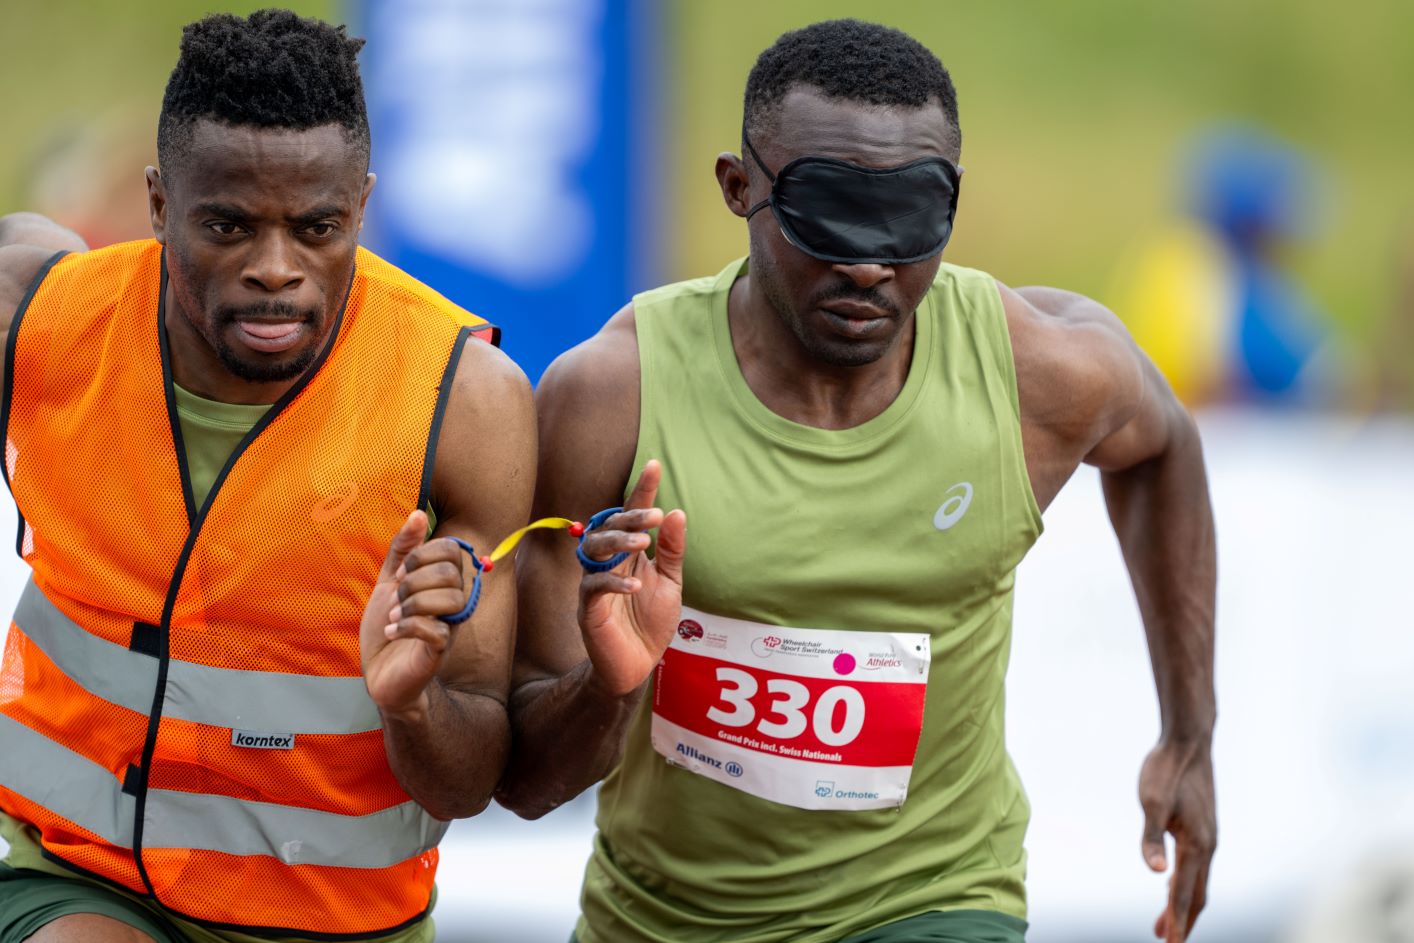 A male sprinter and his sighted guide runner competing.